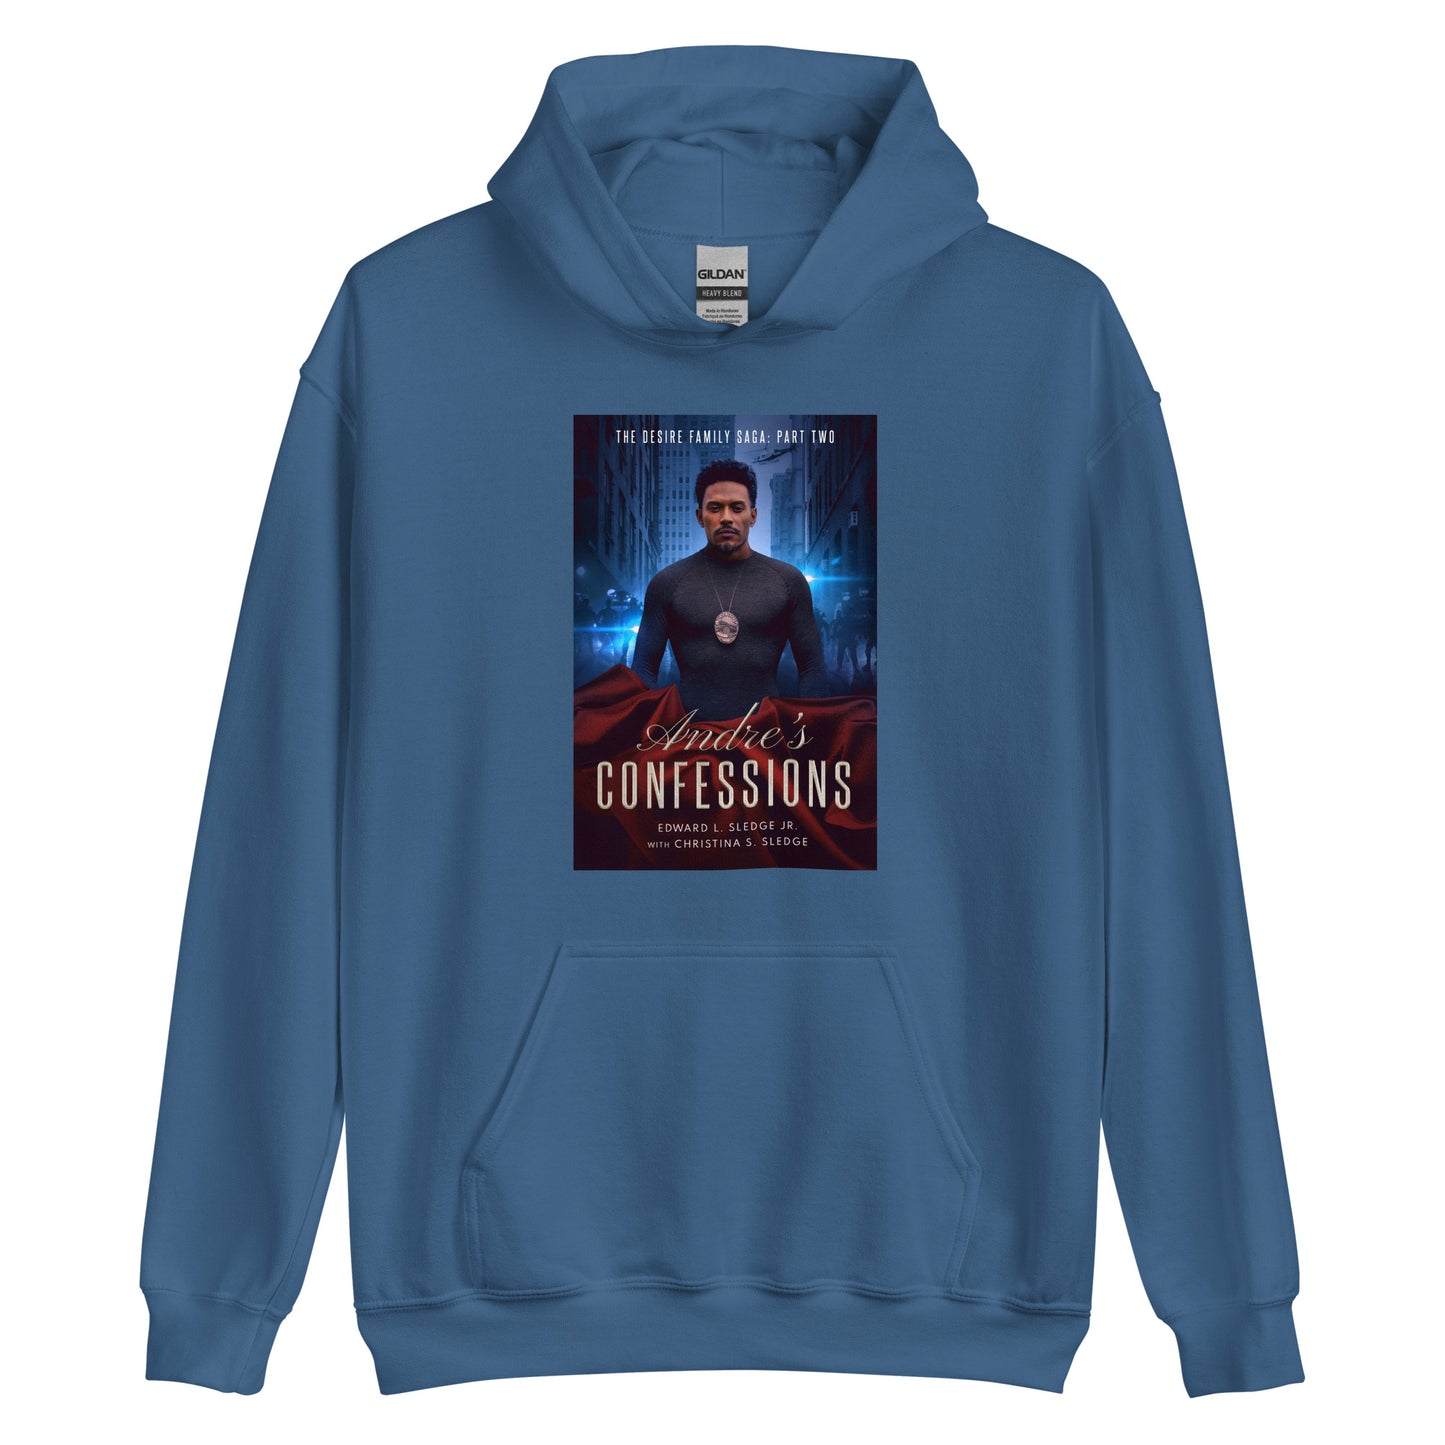 Andre's Confessions Unisex Hoodie